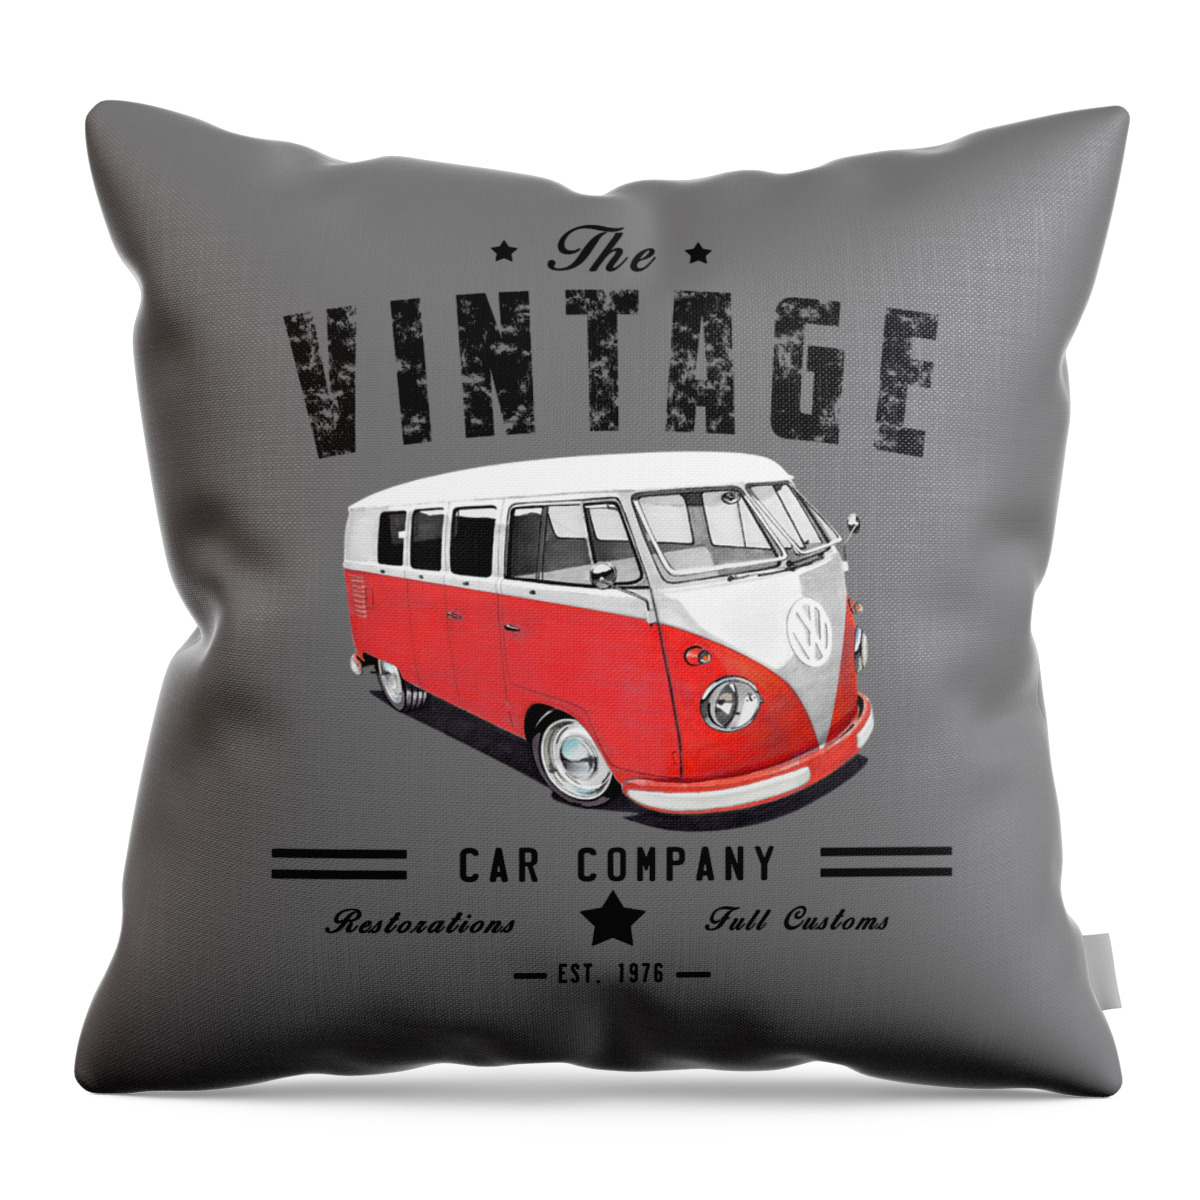 Samba Throw Pillow featuring the drawing Vintage Red Bus Company by Paul Kuras